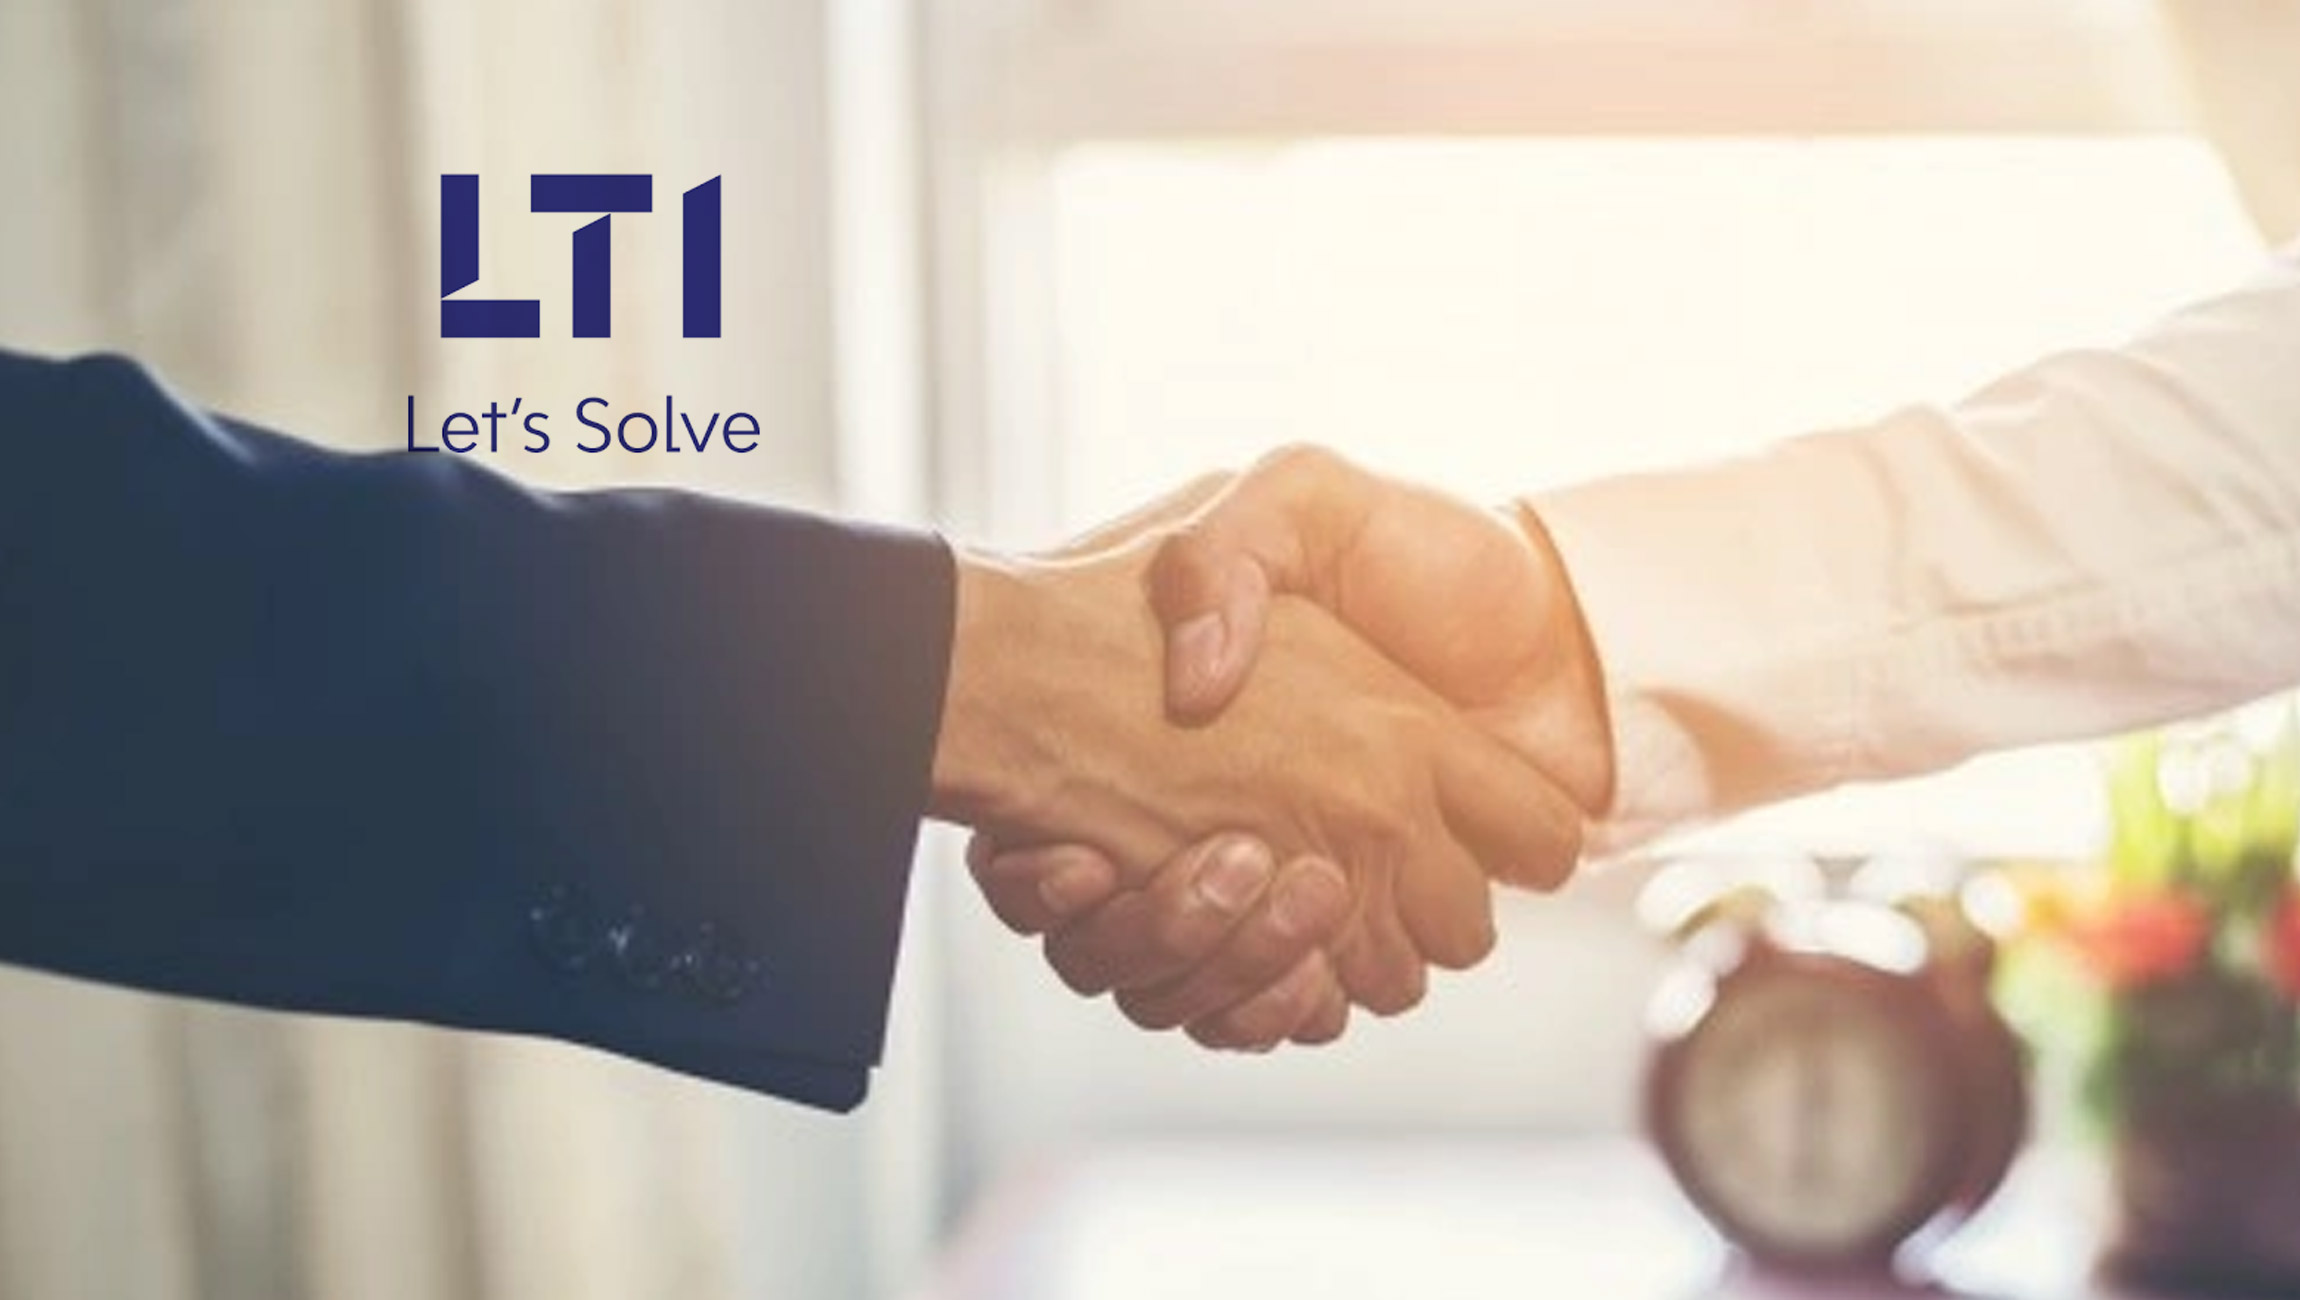 LTI Partners with Securonix & Snowflake to Strengthen Cybersecurity Offerings